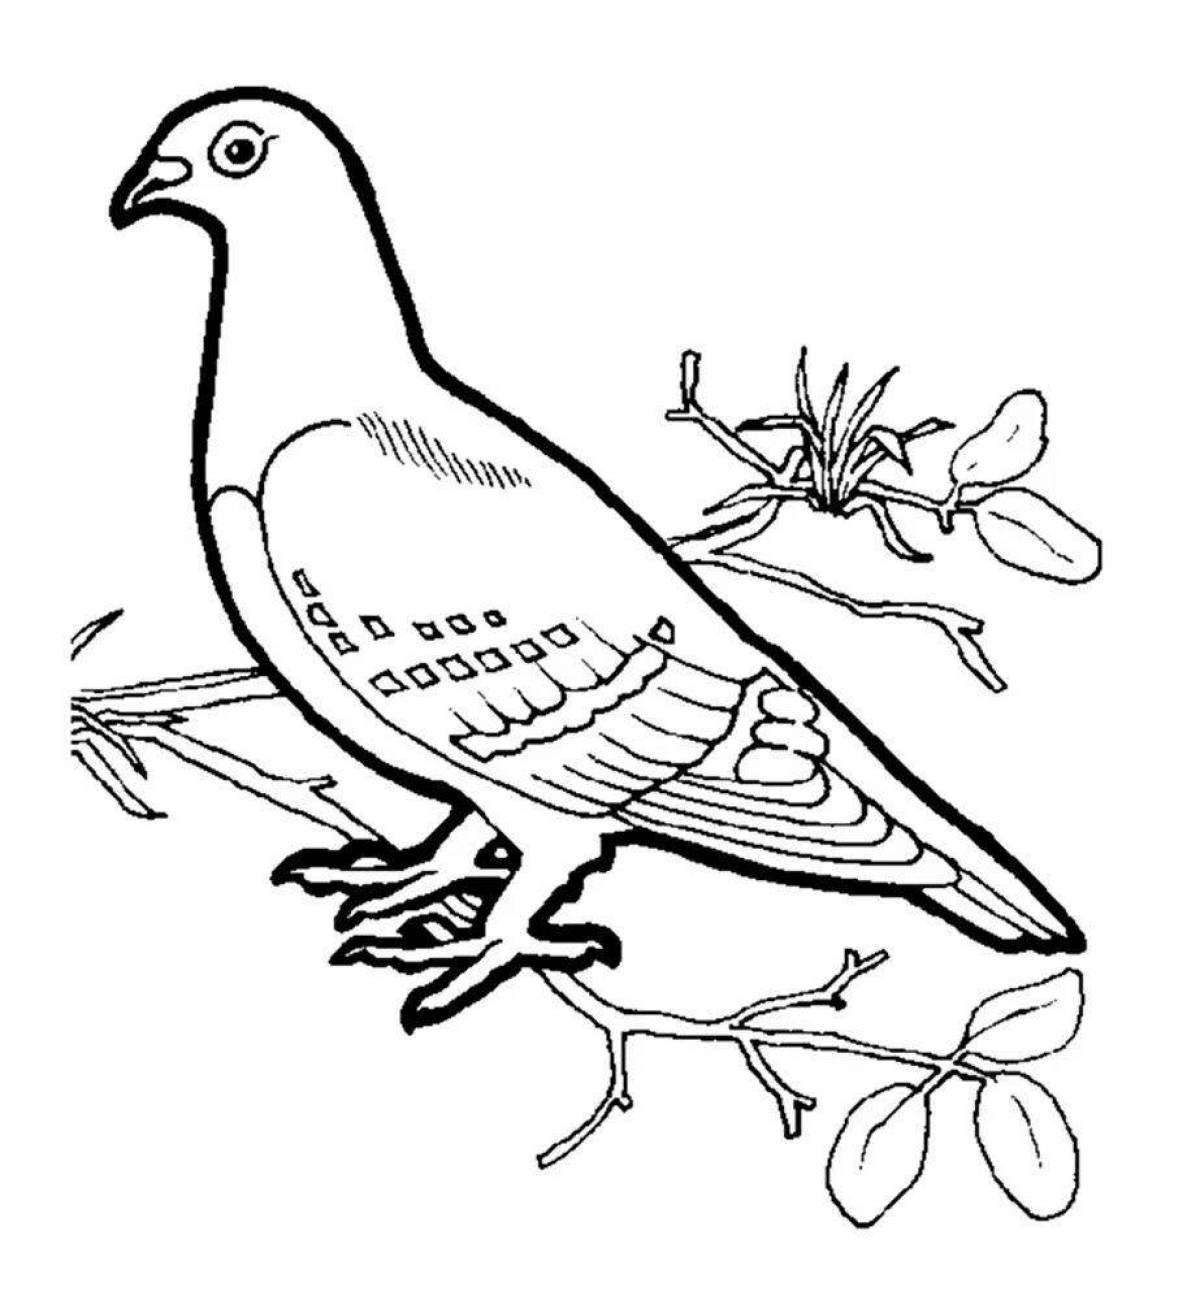 Coloring pages with cute birds for children 5-6 years old